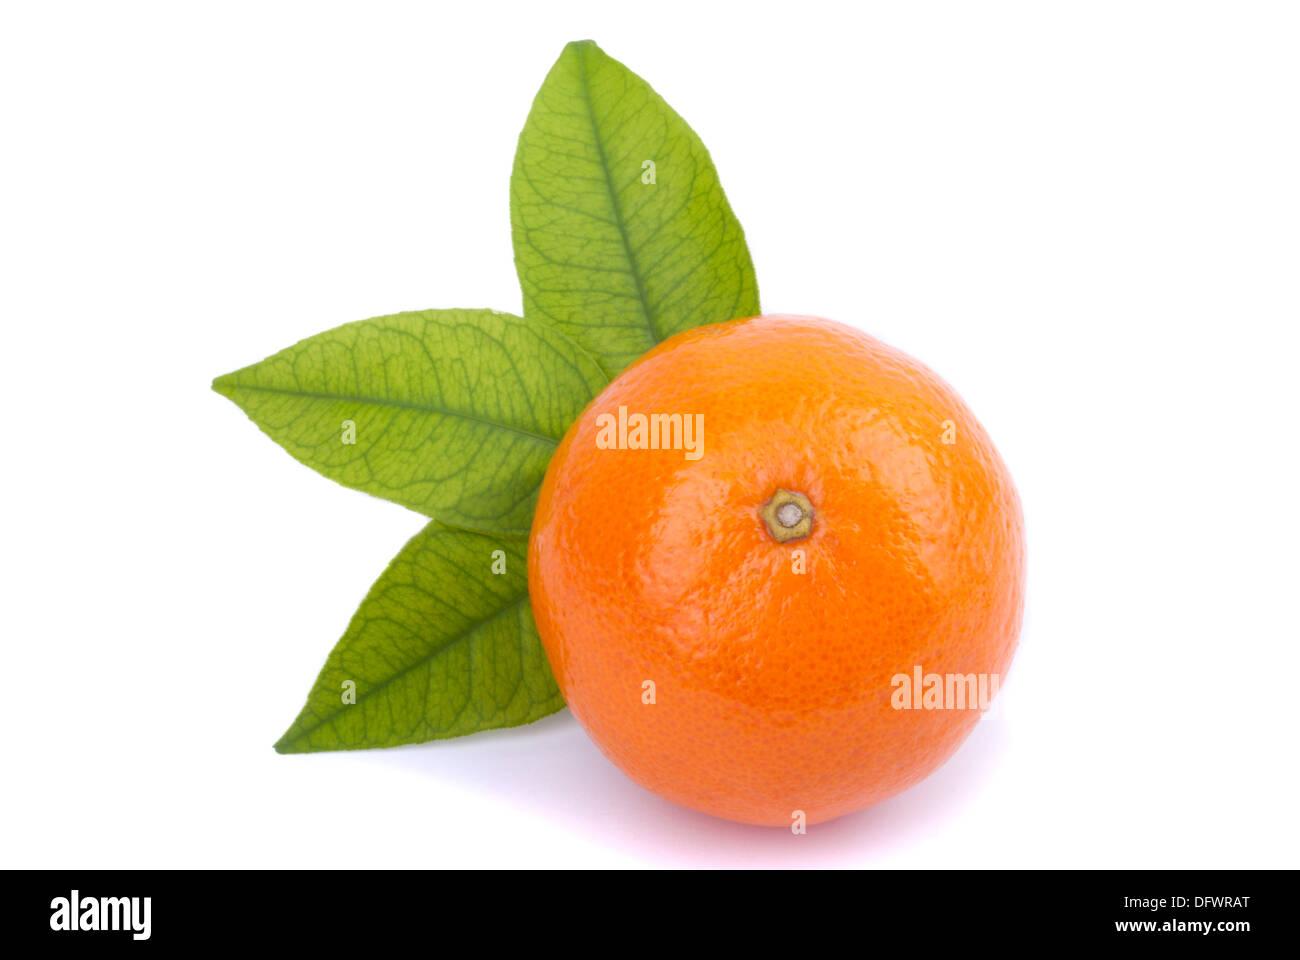 Tangerine with green leaves on a white background. Stock Photo